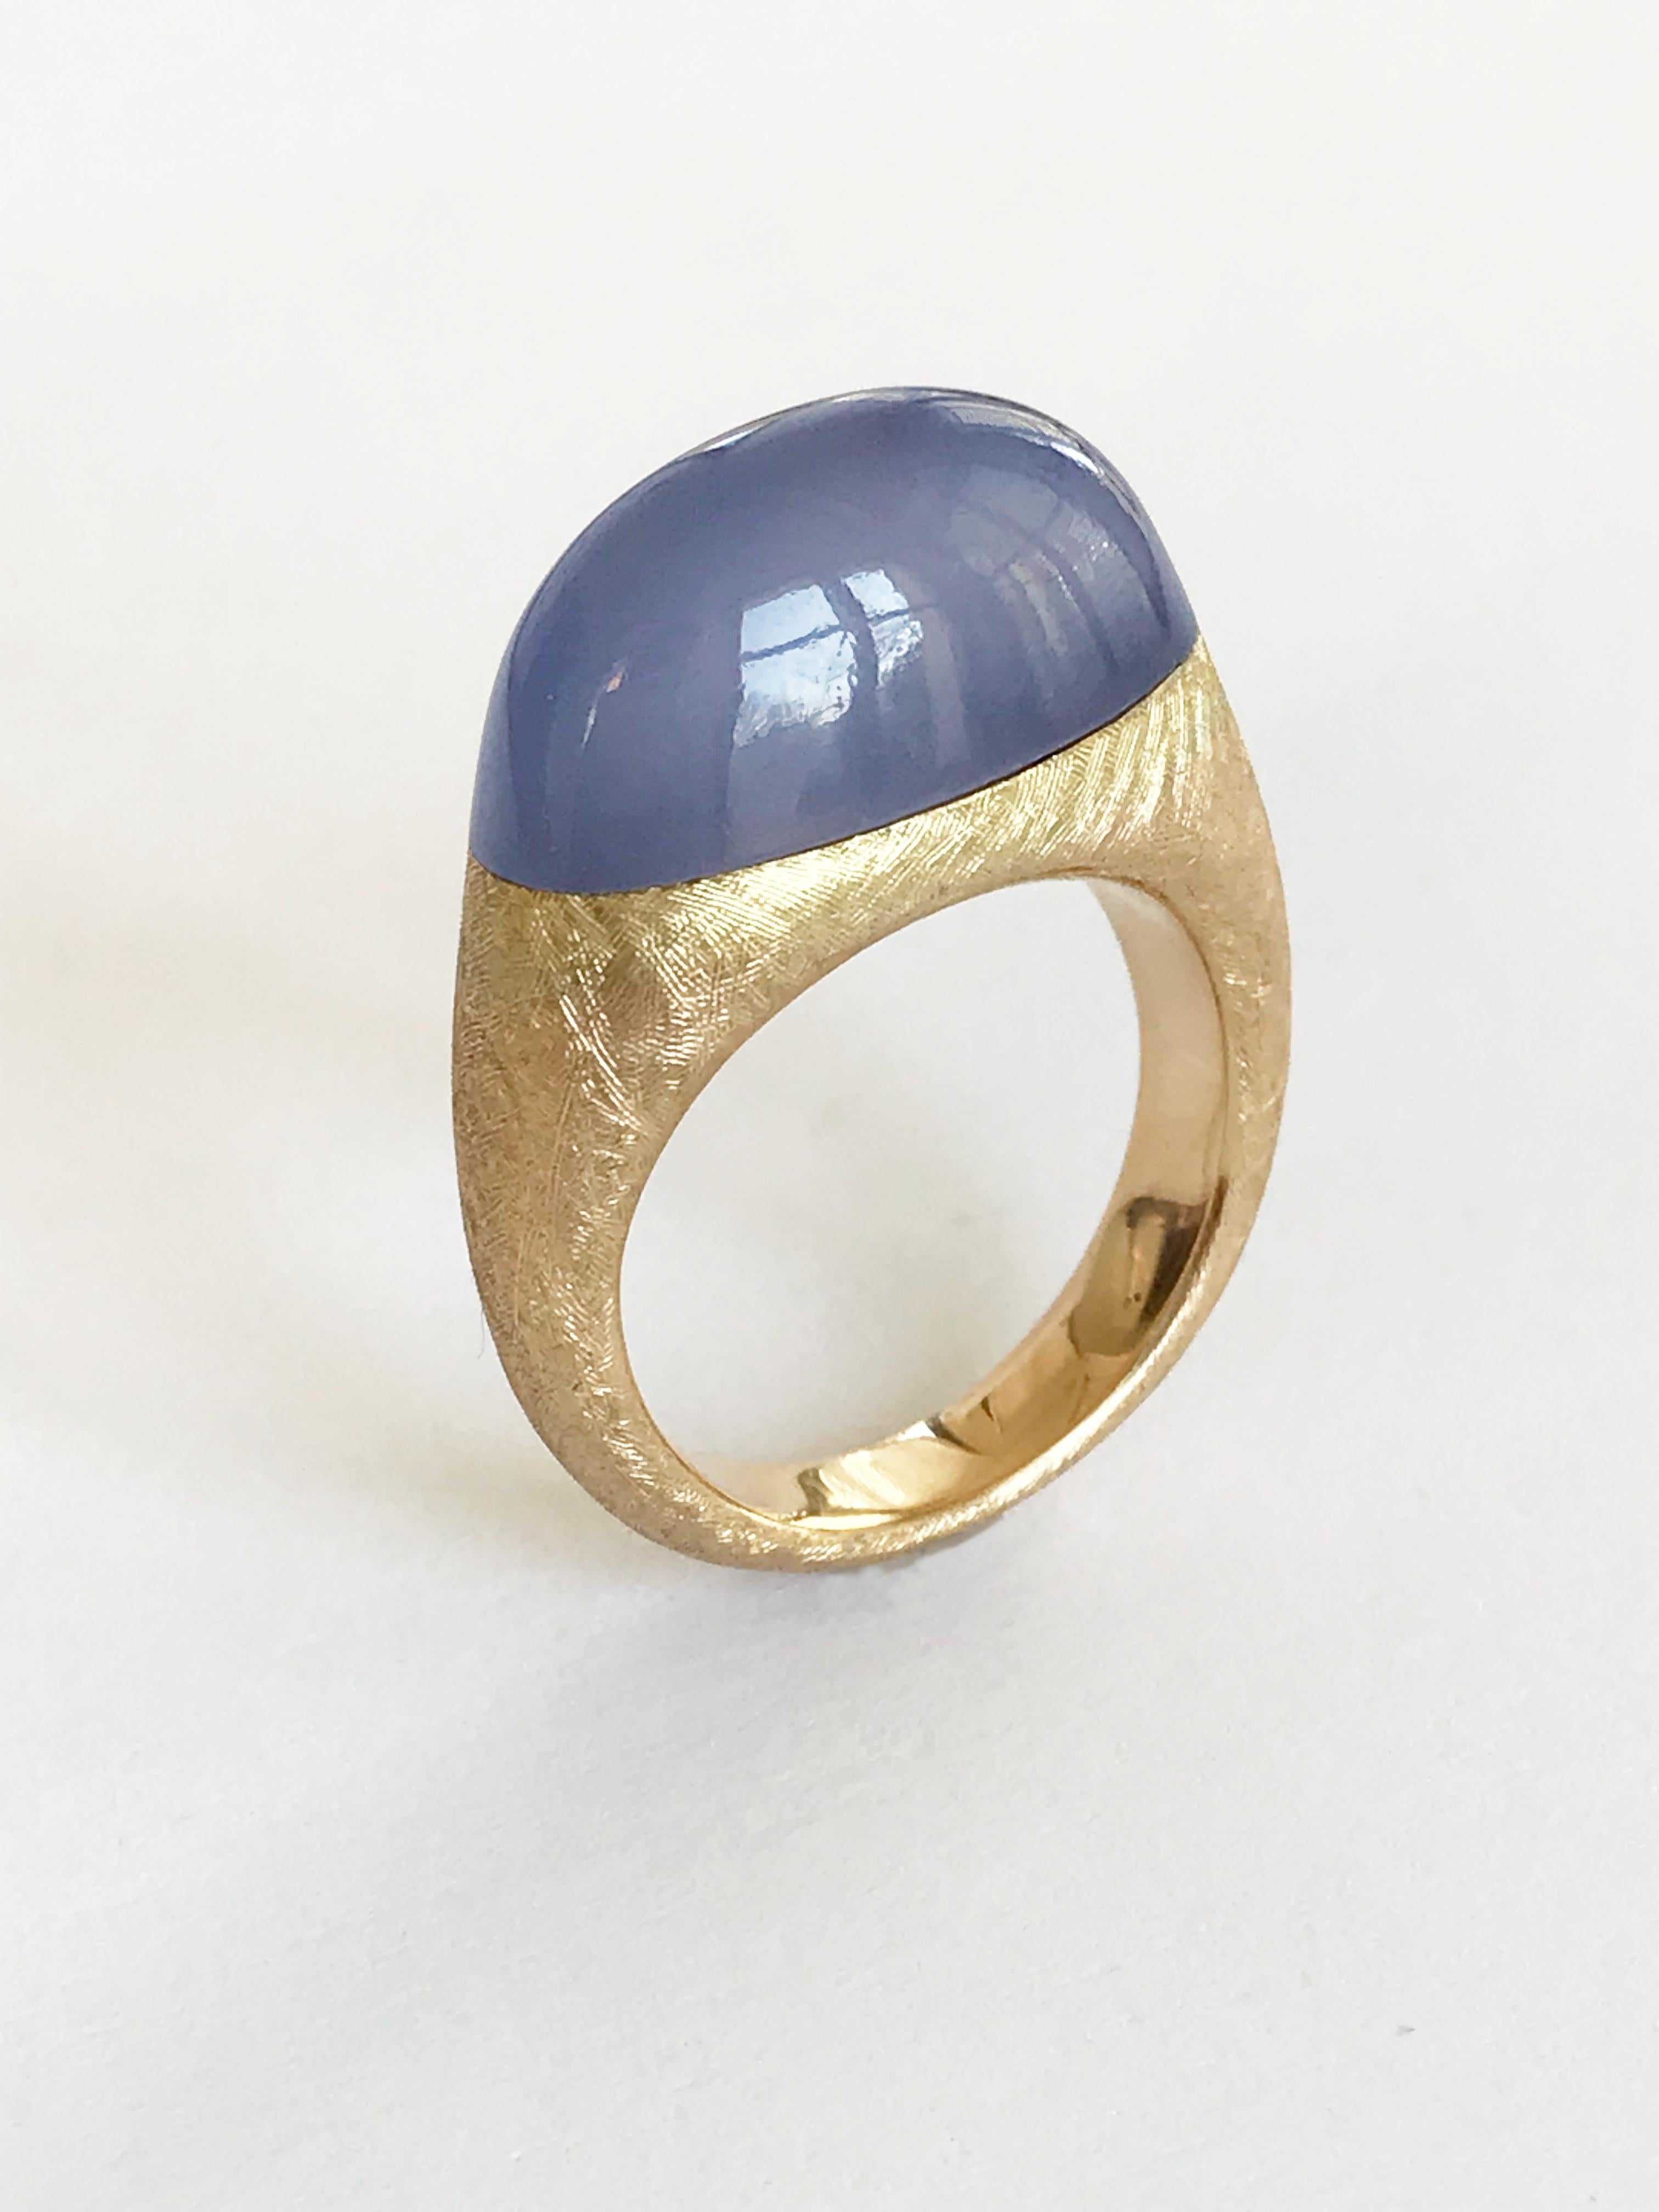 Dalben design 18k yellow gold ring with a 13 carat bezel-set Namibian Chalcedony.
Ring size 7 - EU 54 .
The ring is completely handmade in our atelier in Como, Italy with rigorous quality workmanship.